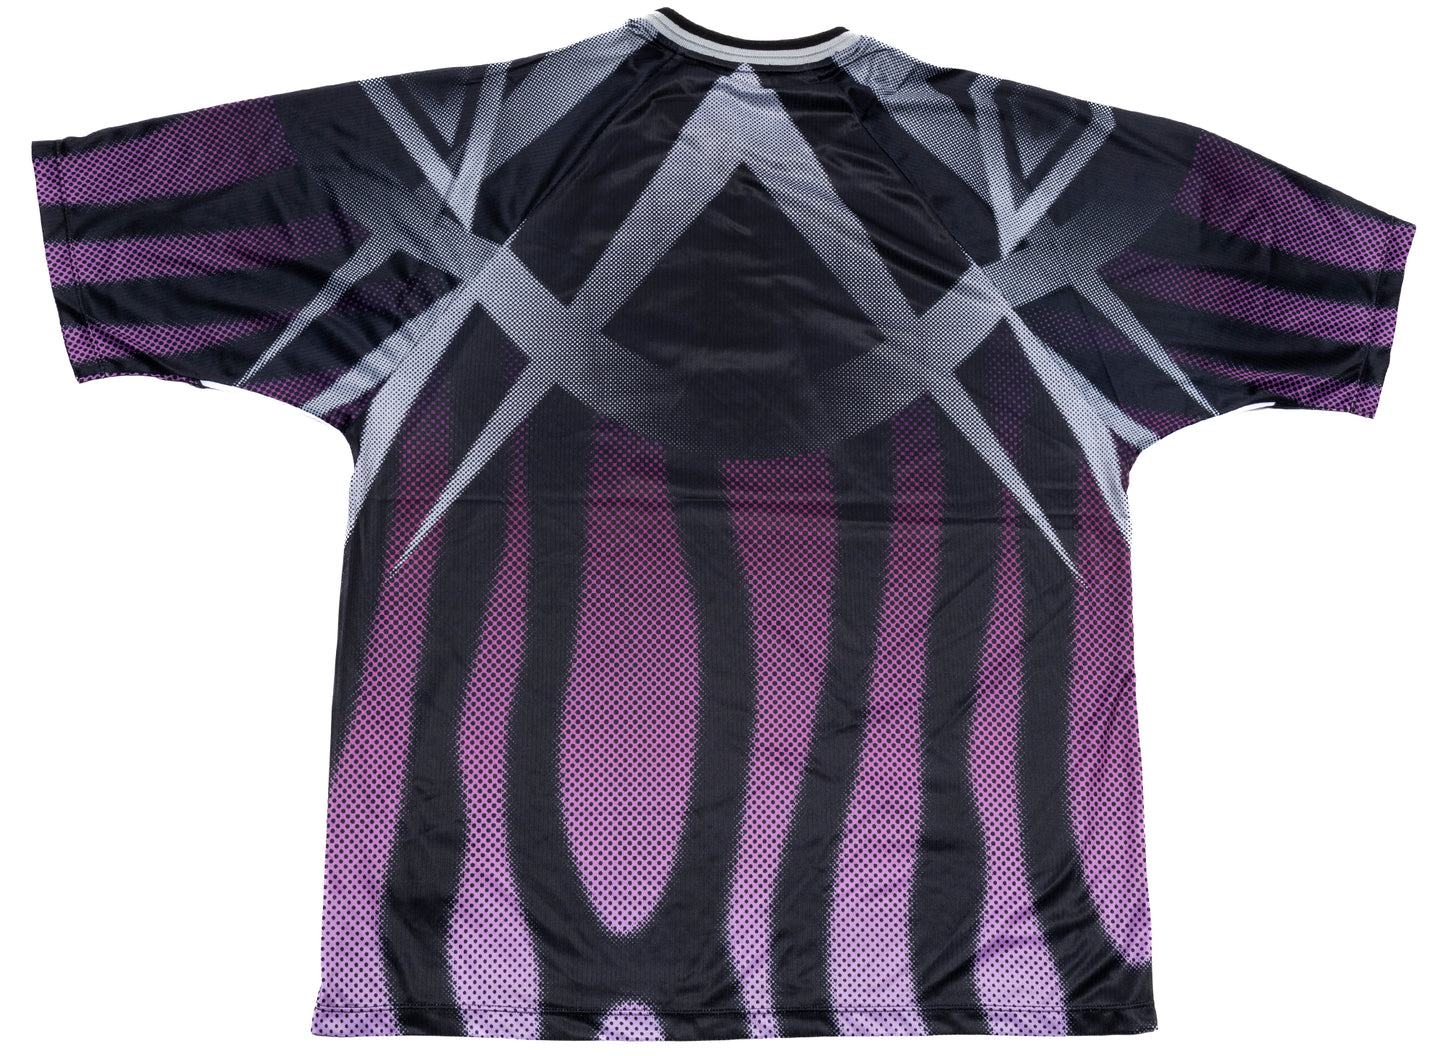 Umbro Penalty Culture Kit Poly Jersey xld